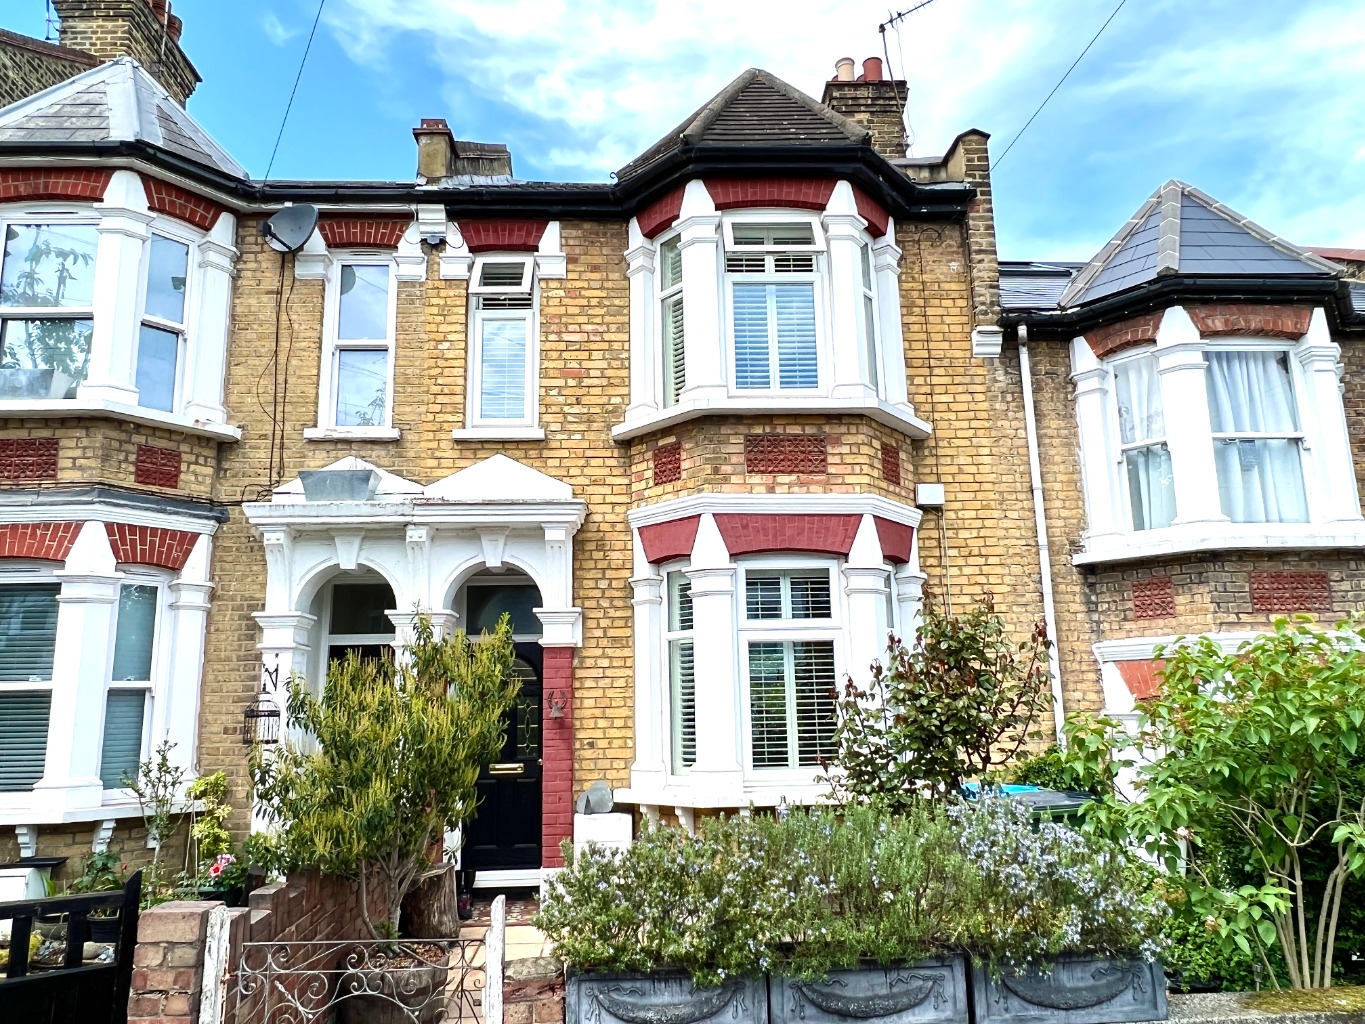 Available from the beginning of July, Beaumont Gibbs are delighted to offer this stunning three double bedroomed Victorian terrace house to let. The house comes partly furnished, with the main bedroom coming fully furnished and the kitchen complete with the white goods remaining.